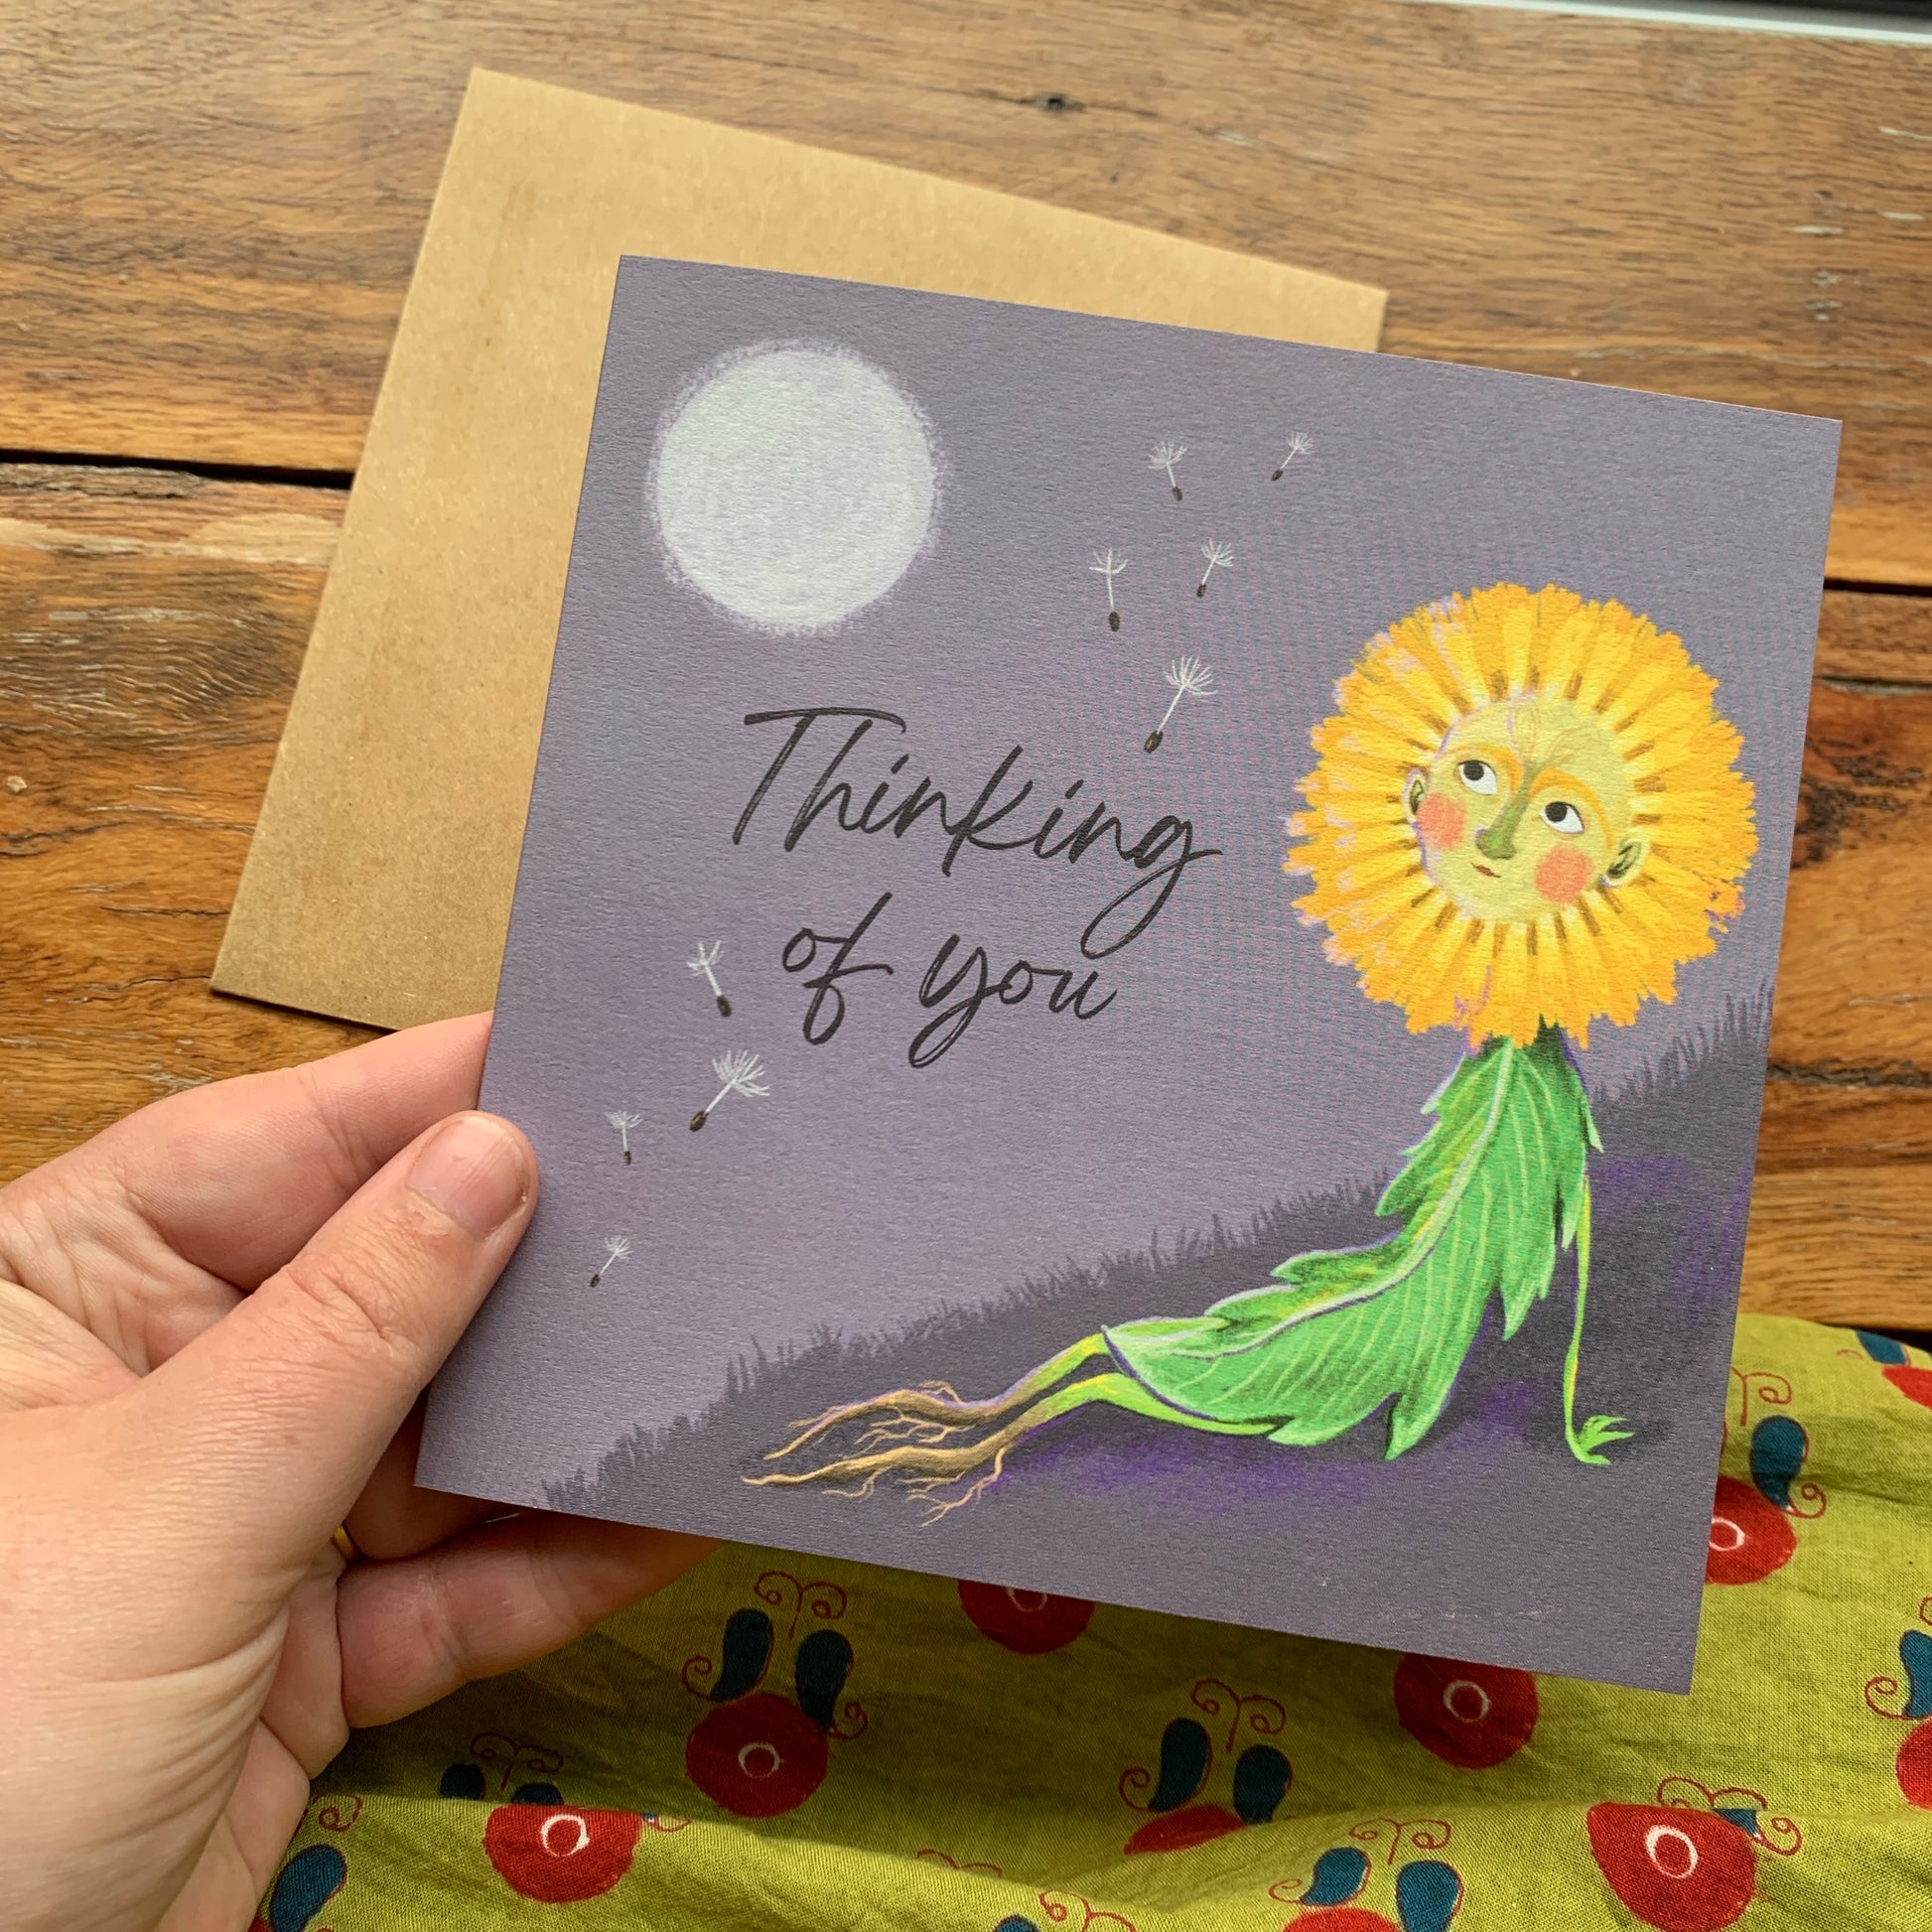 Anna Seed Art | Occasion Card - Thinking of you. Cute flower illustration